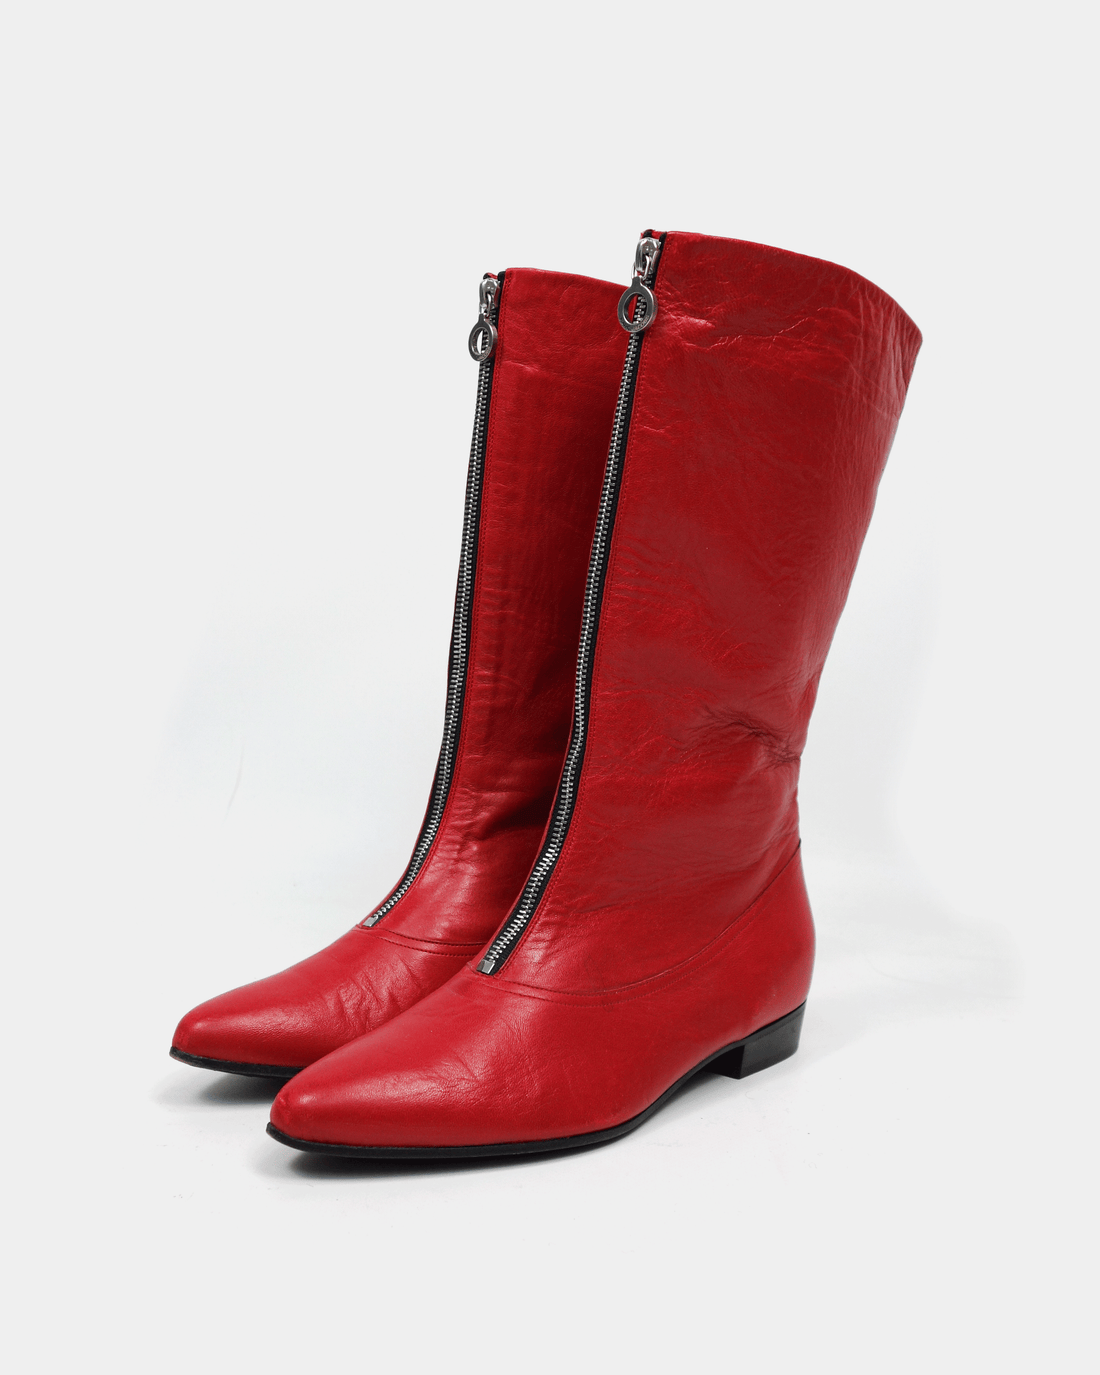 Marc Jacobs Zipped Red Leather Boots 2000's